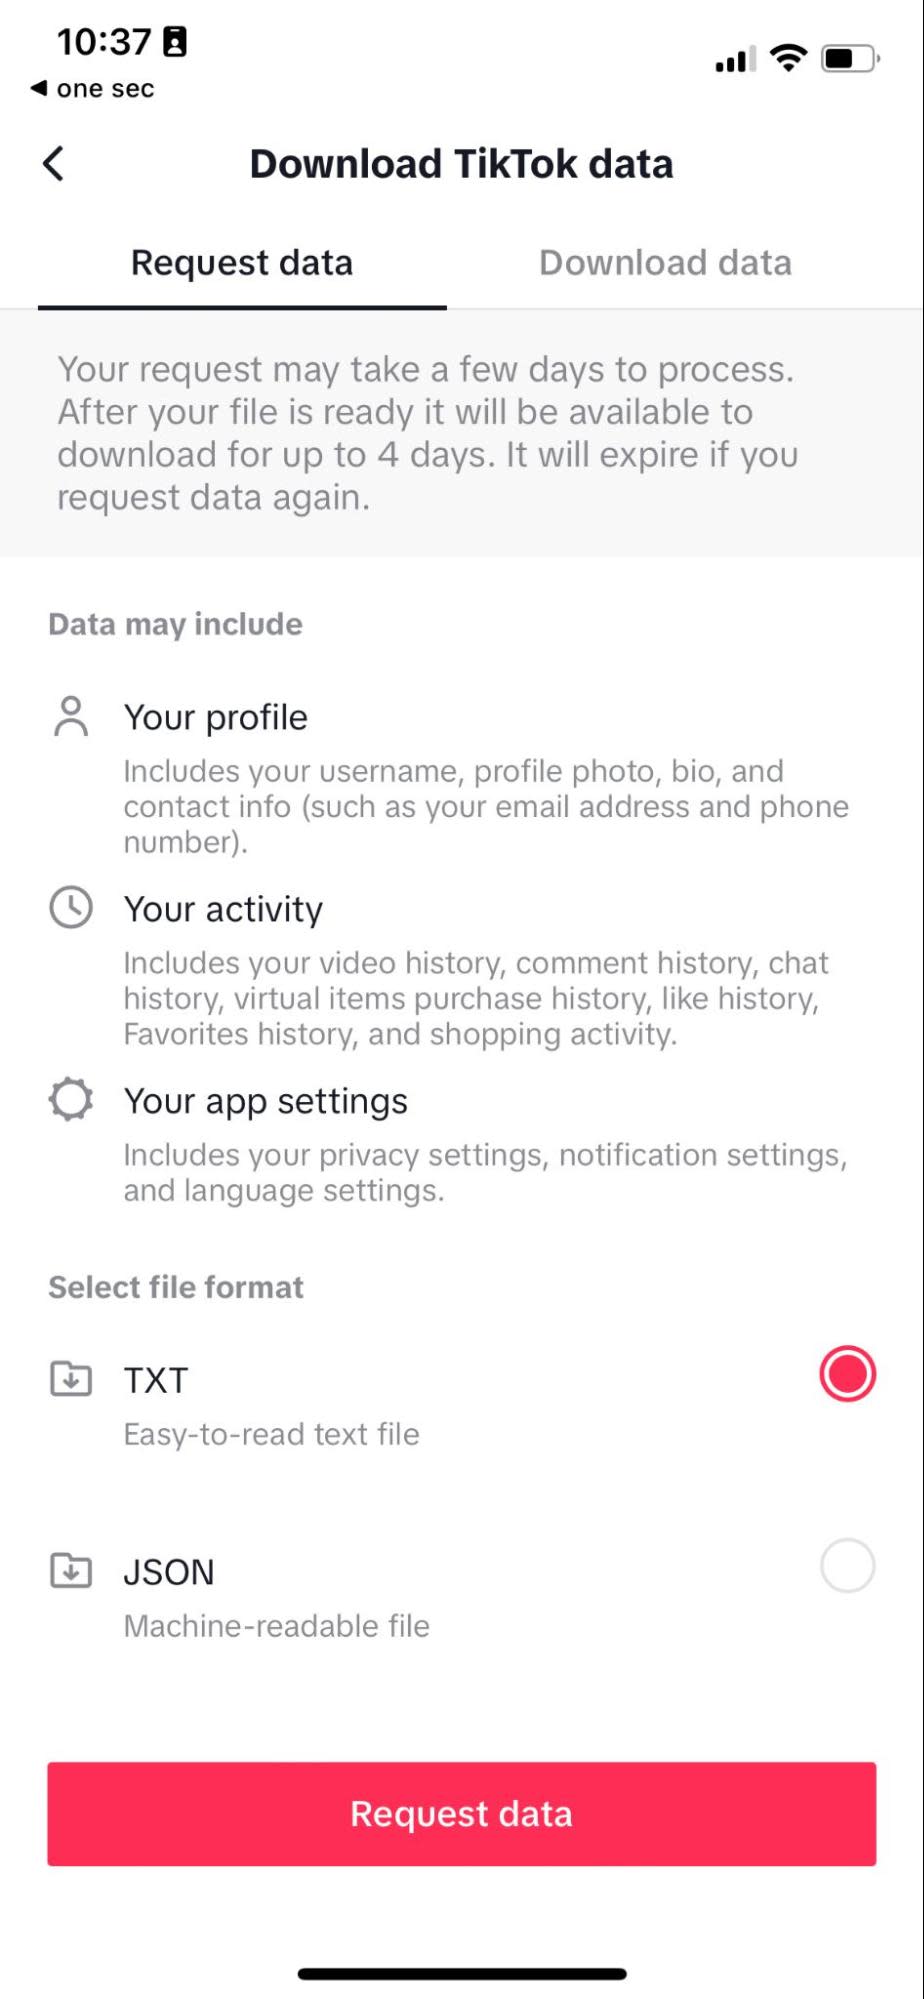 Selecting which data to download in TikTok